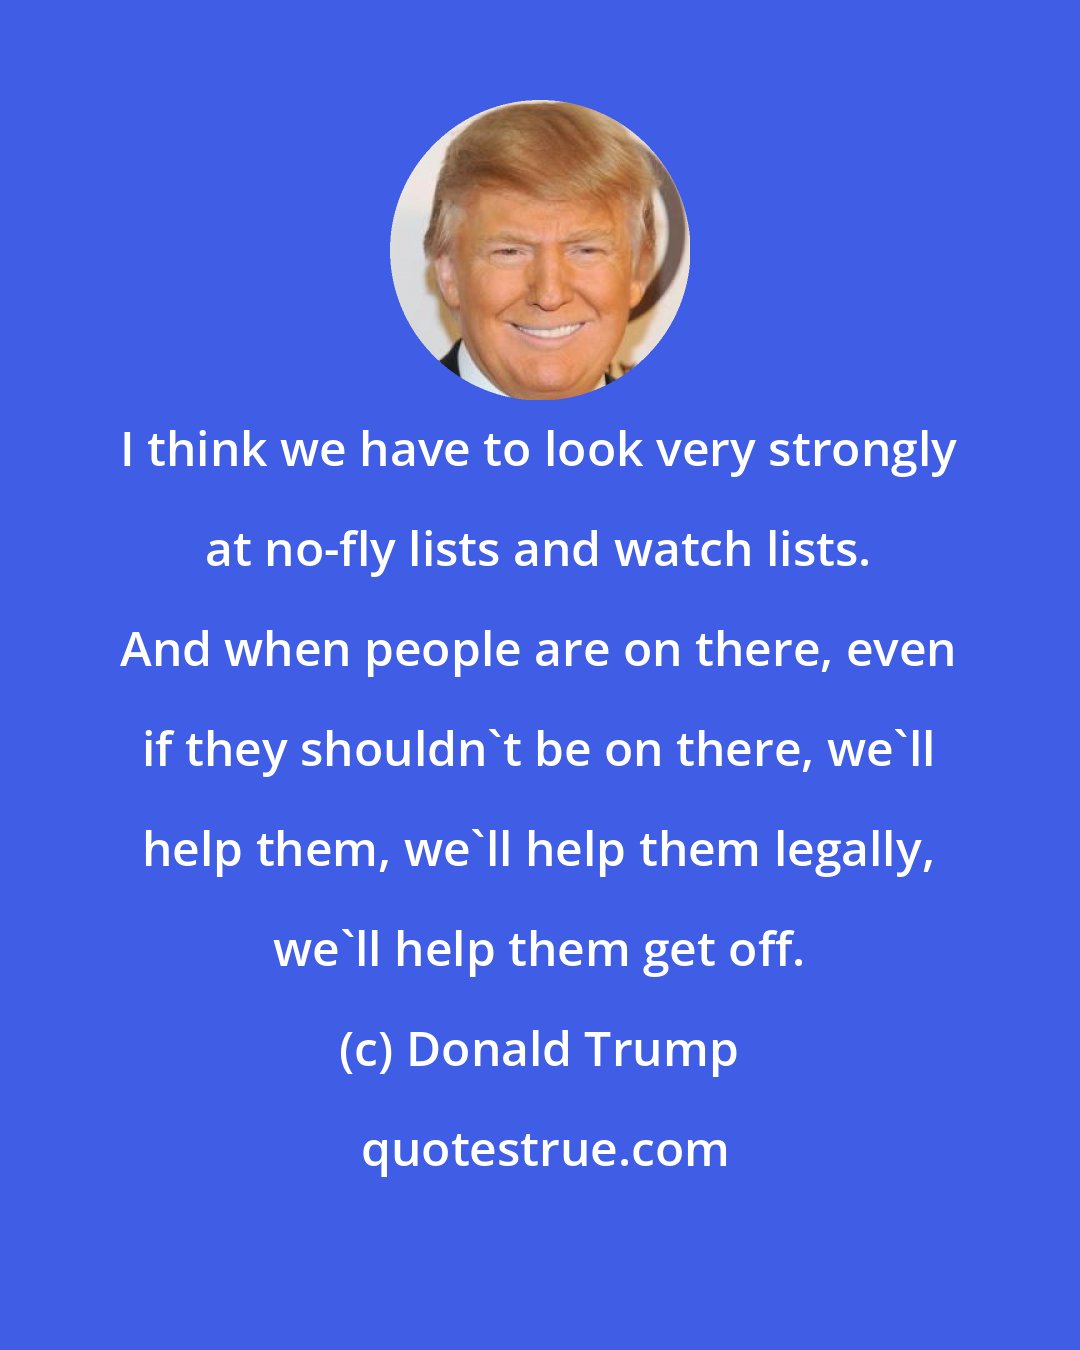 Donald Trump: I think we have to look very strongly at no-fly lists and watch lists. And when people are on there, even if they shouldn't be on there, we'll help them, we'll help them legally, we'll help them get off.